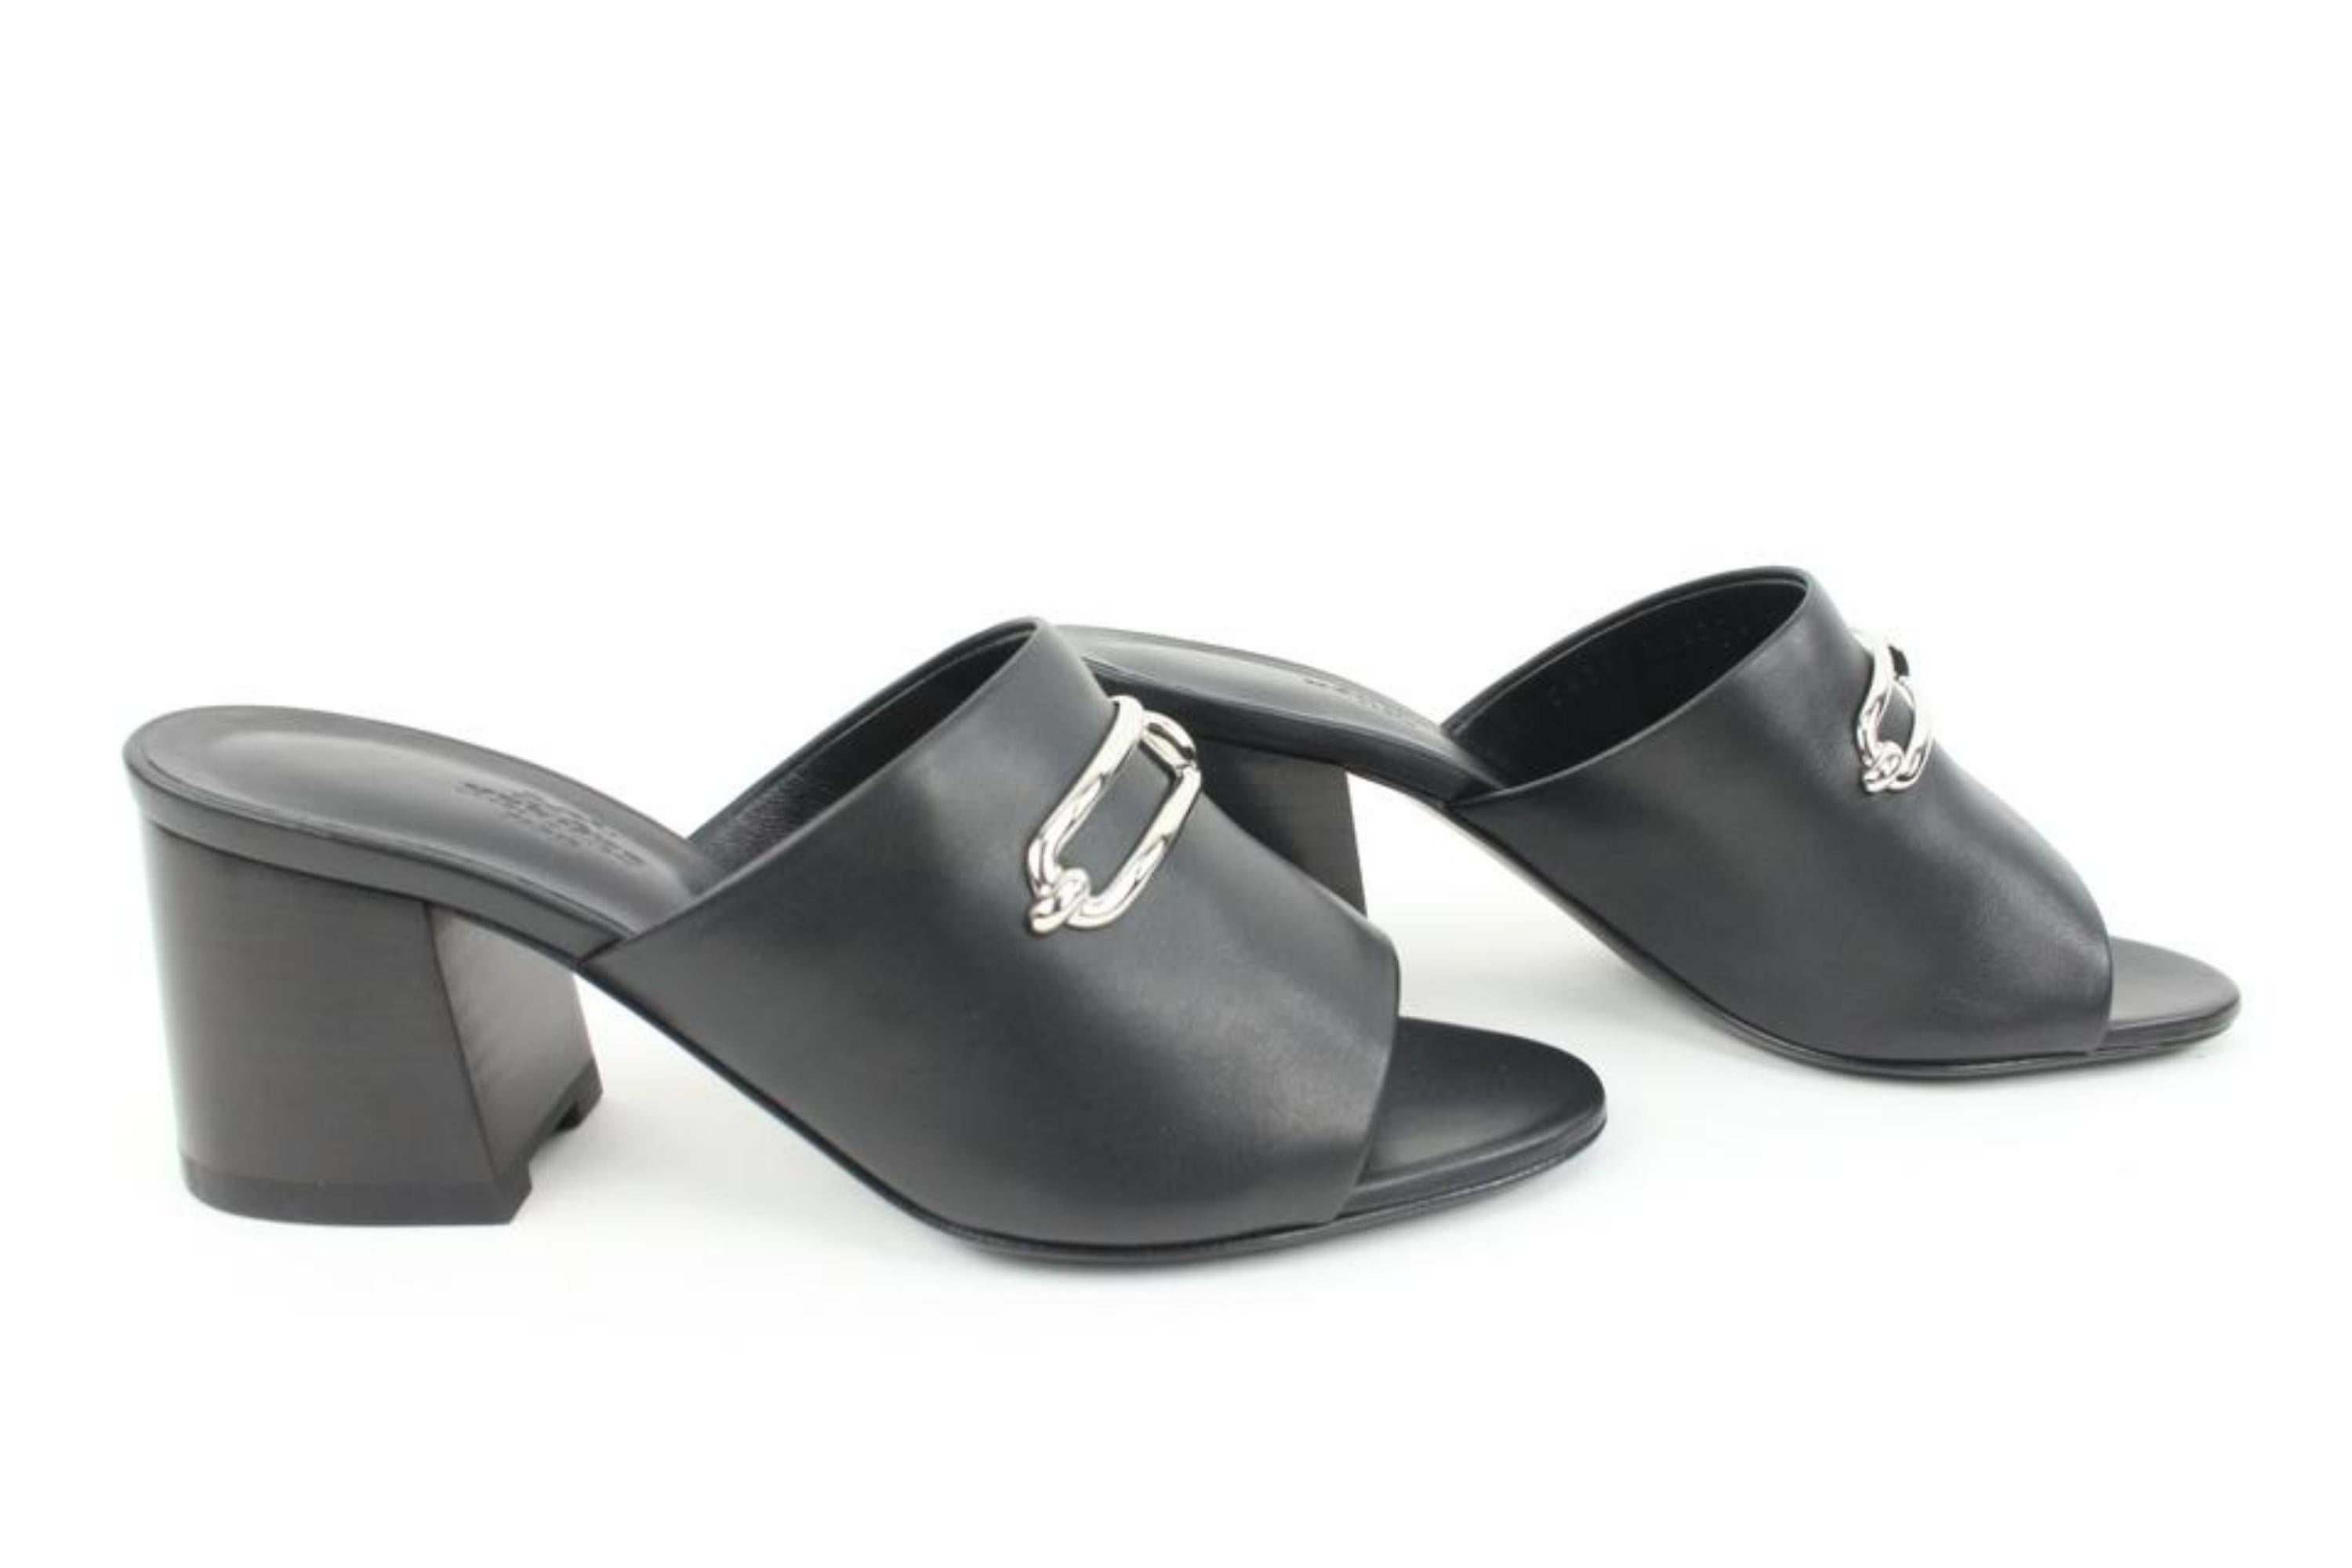 Hermès Size 36.5  Black x Silver  Leather Camilla Mules Femme 60 S126H54
Date Code/Serial Number: CM21128672010
Made In: Italy
Measurements: Length:  9